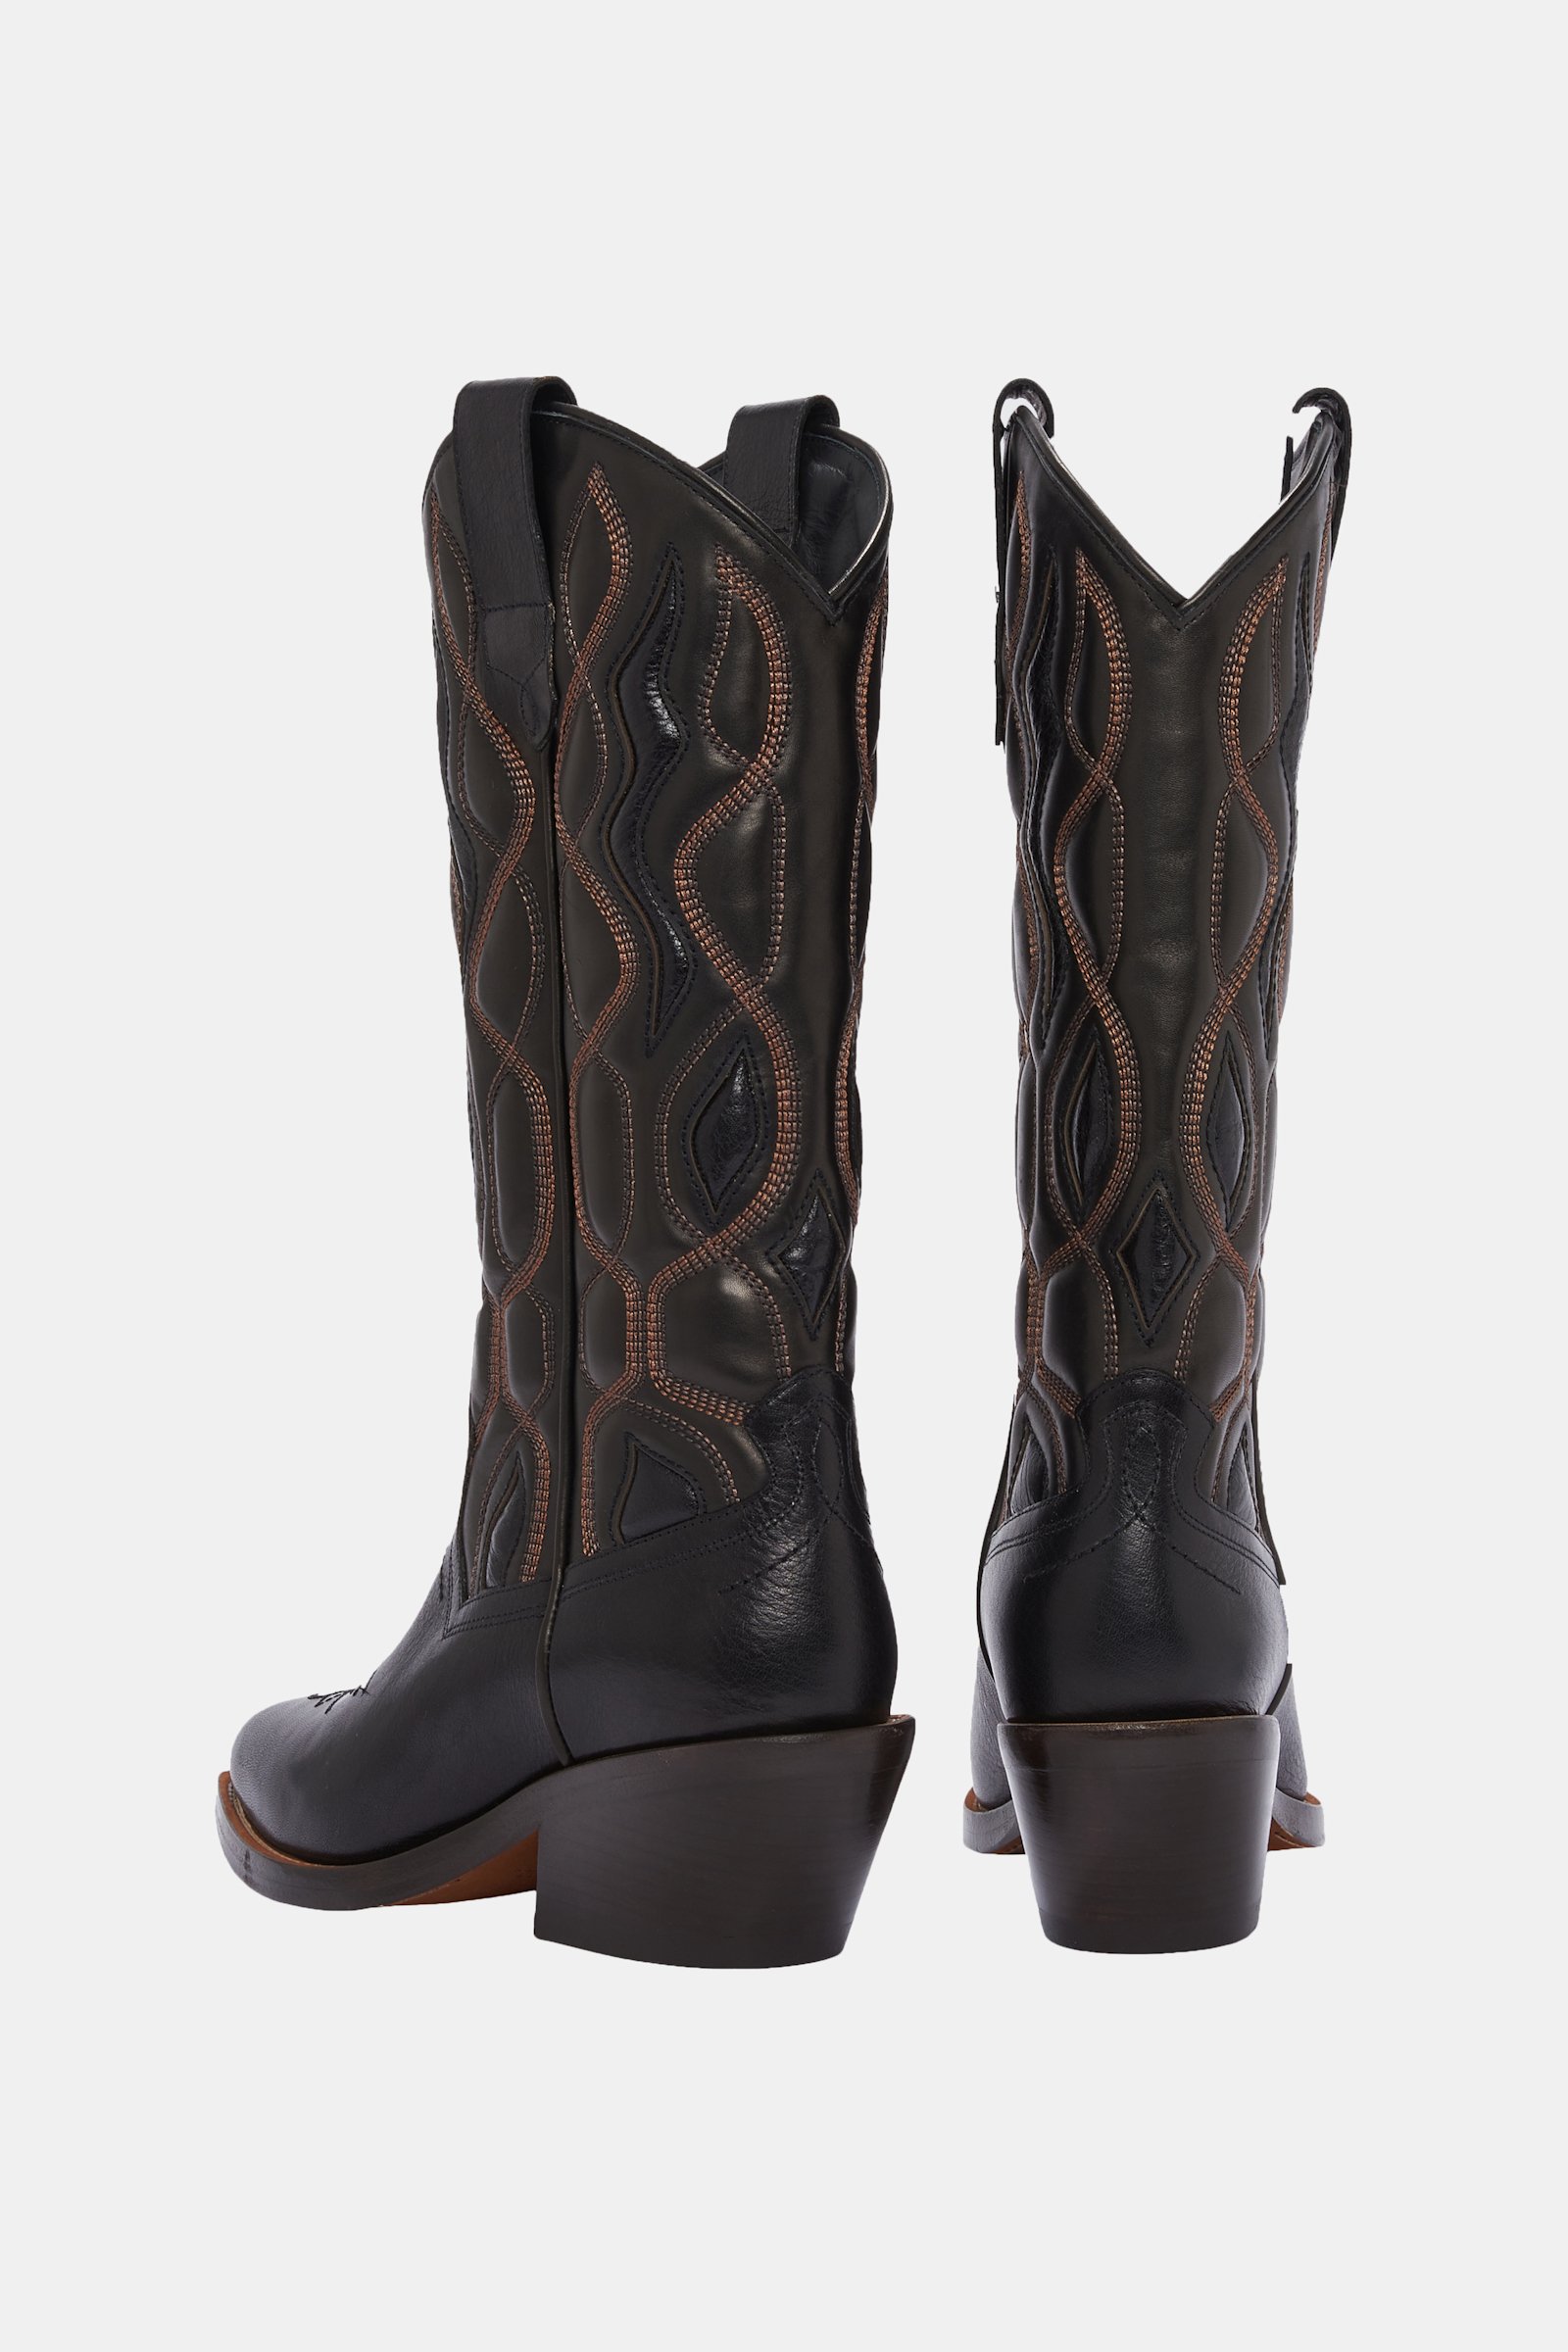 Dorothee Schumacher Cowboyboots mit Embroidery brown and black mix